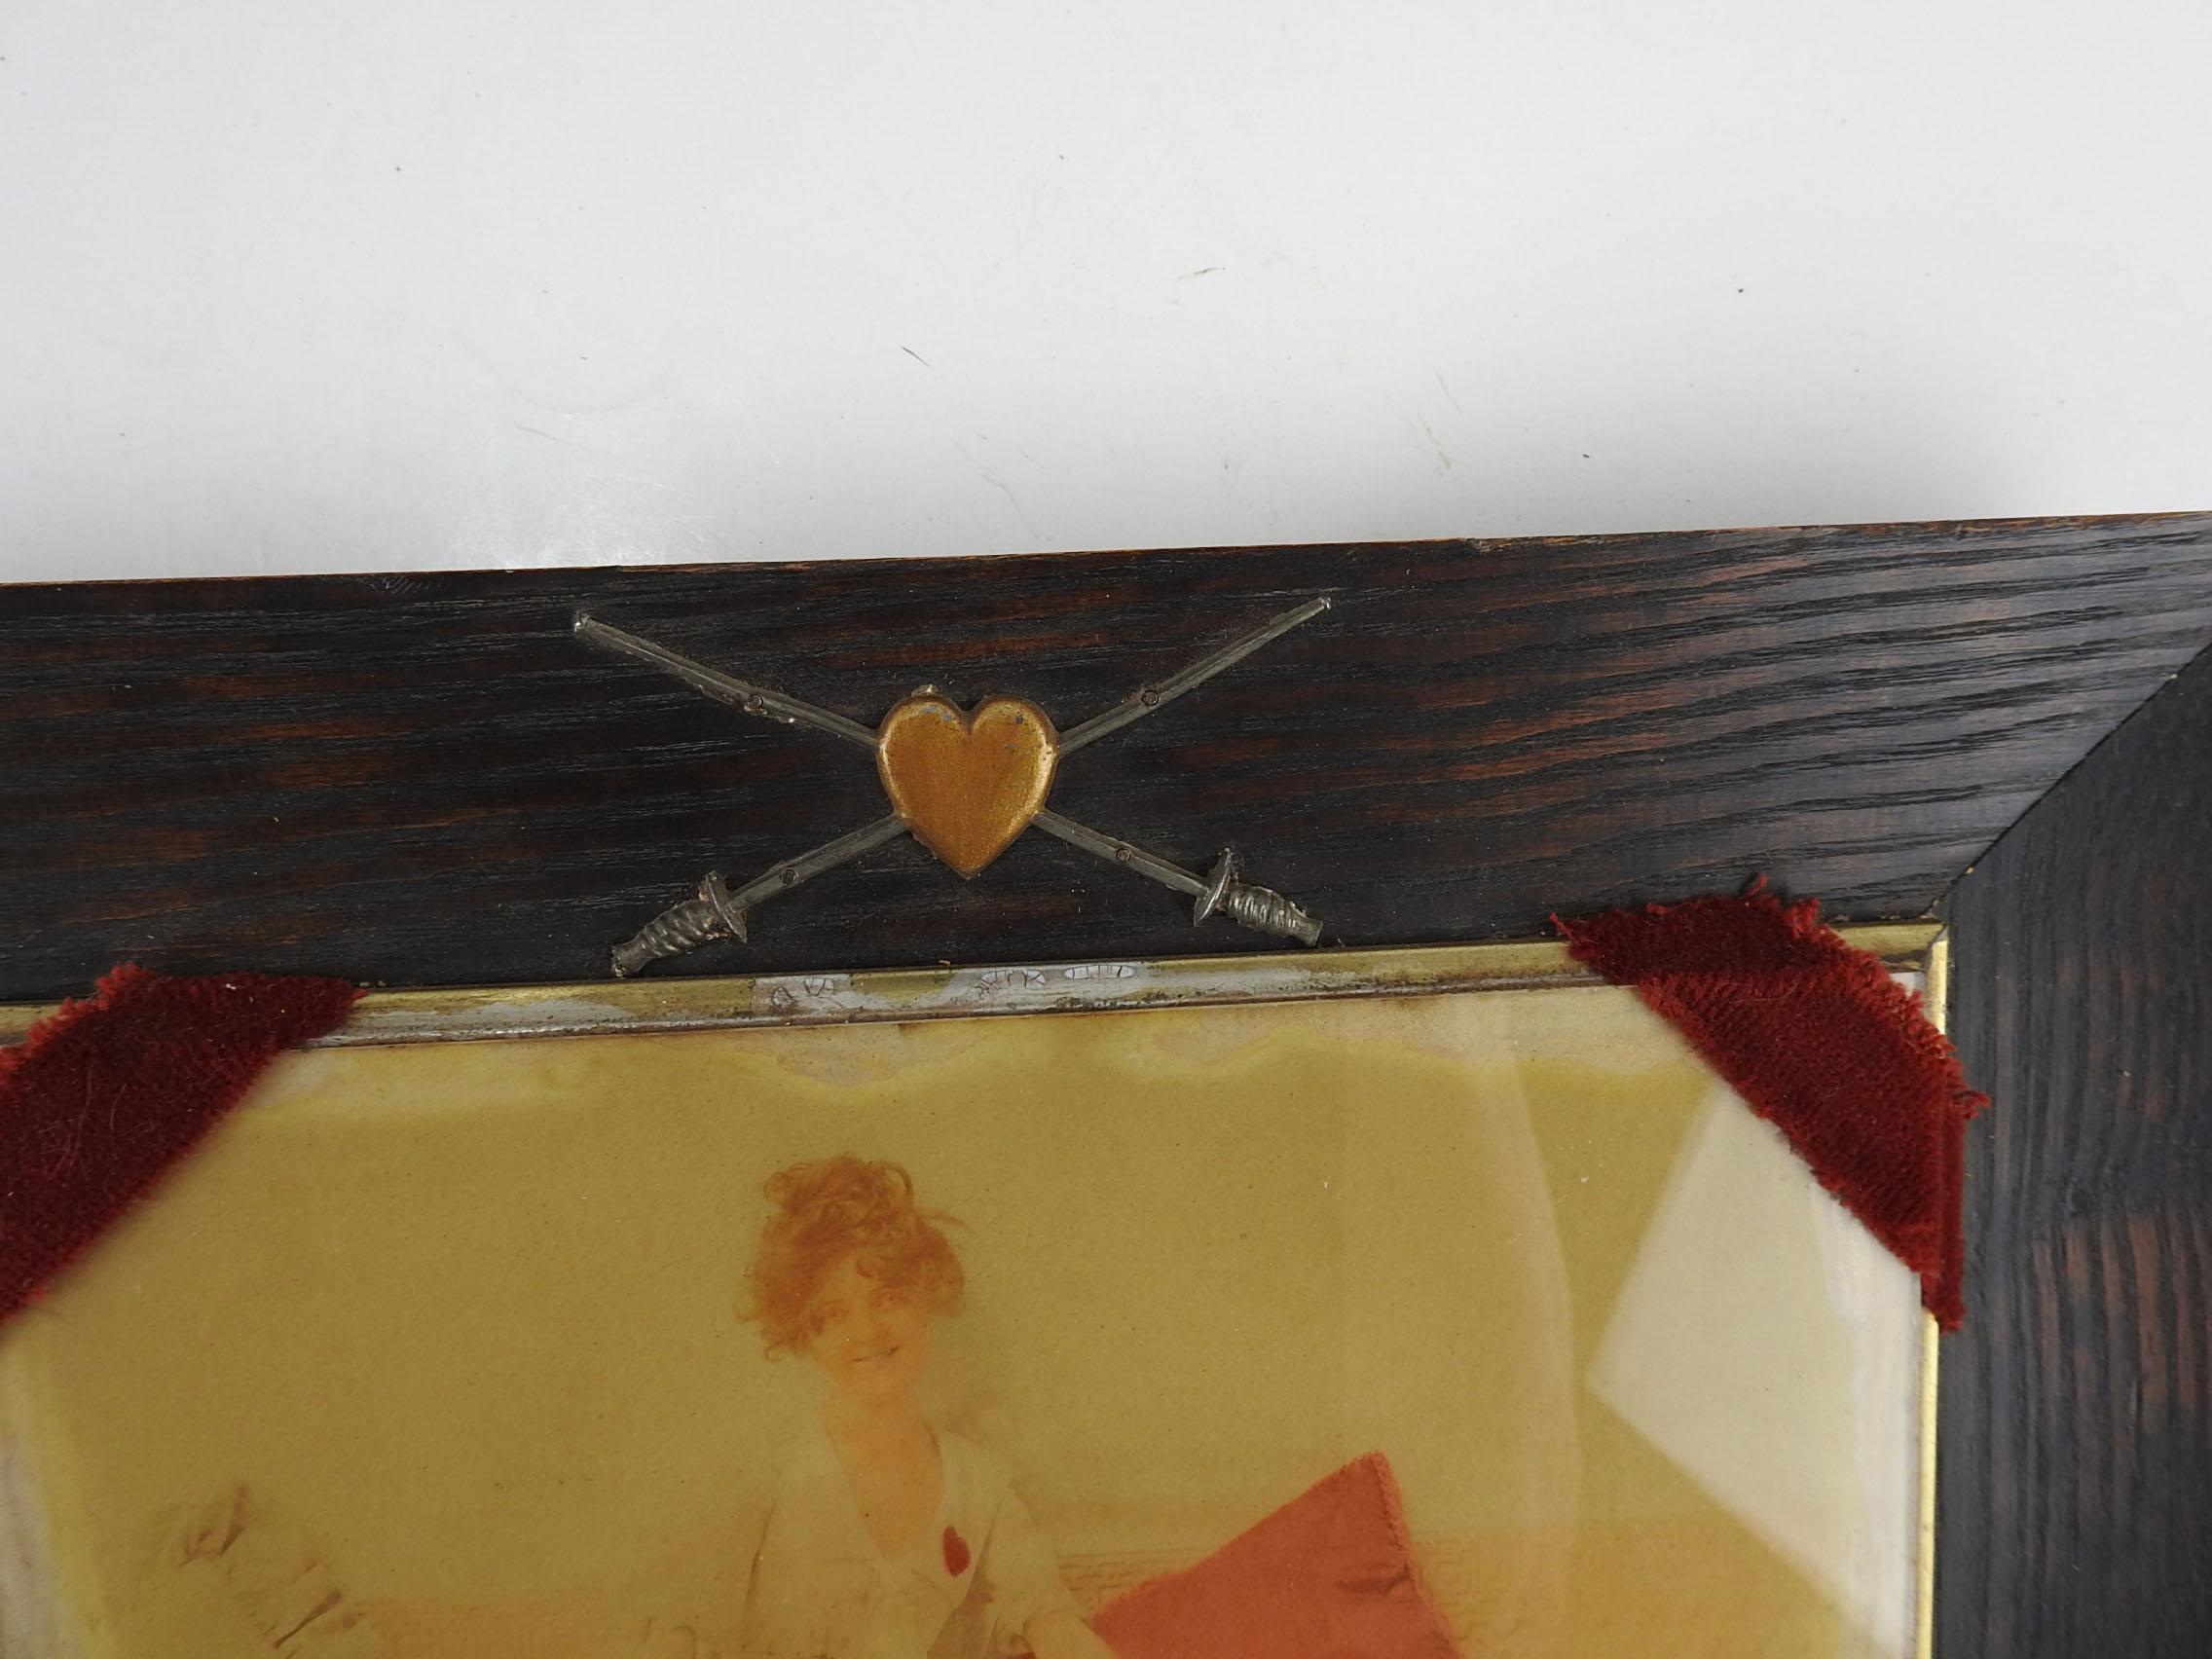 Circa 1900 fencing themed photograph of woman in fencing garb with red heart holding an epee.  Tinted red pillow and heart, original oak frame with heart and crossed fencing foils.  Photo is under glass, mounted on top of frame with burgundy velvet